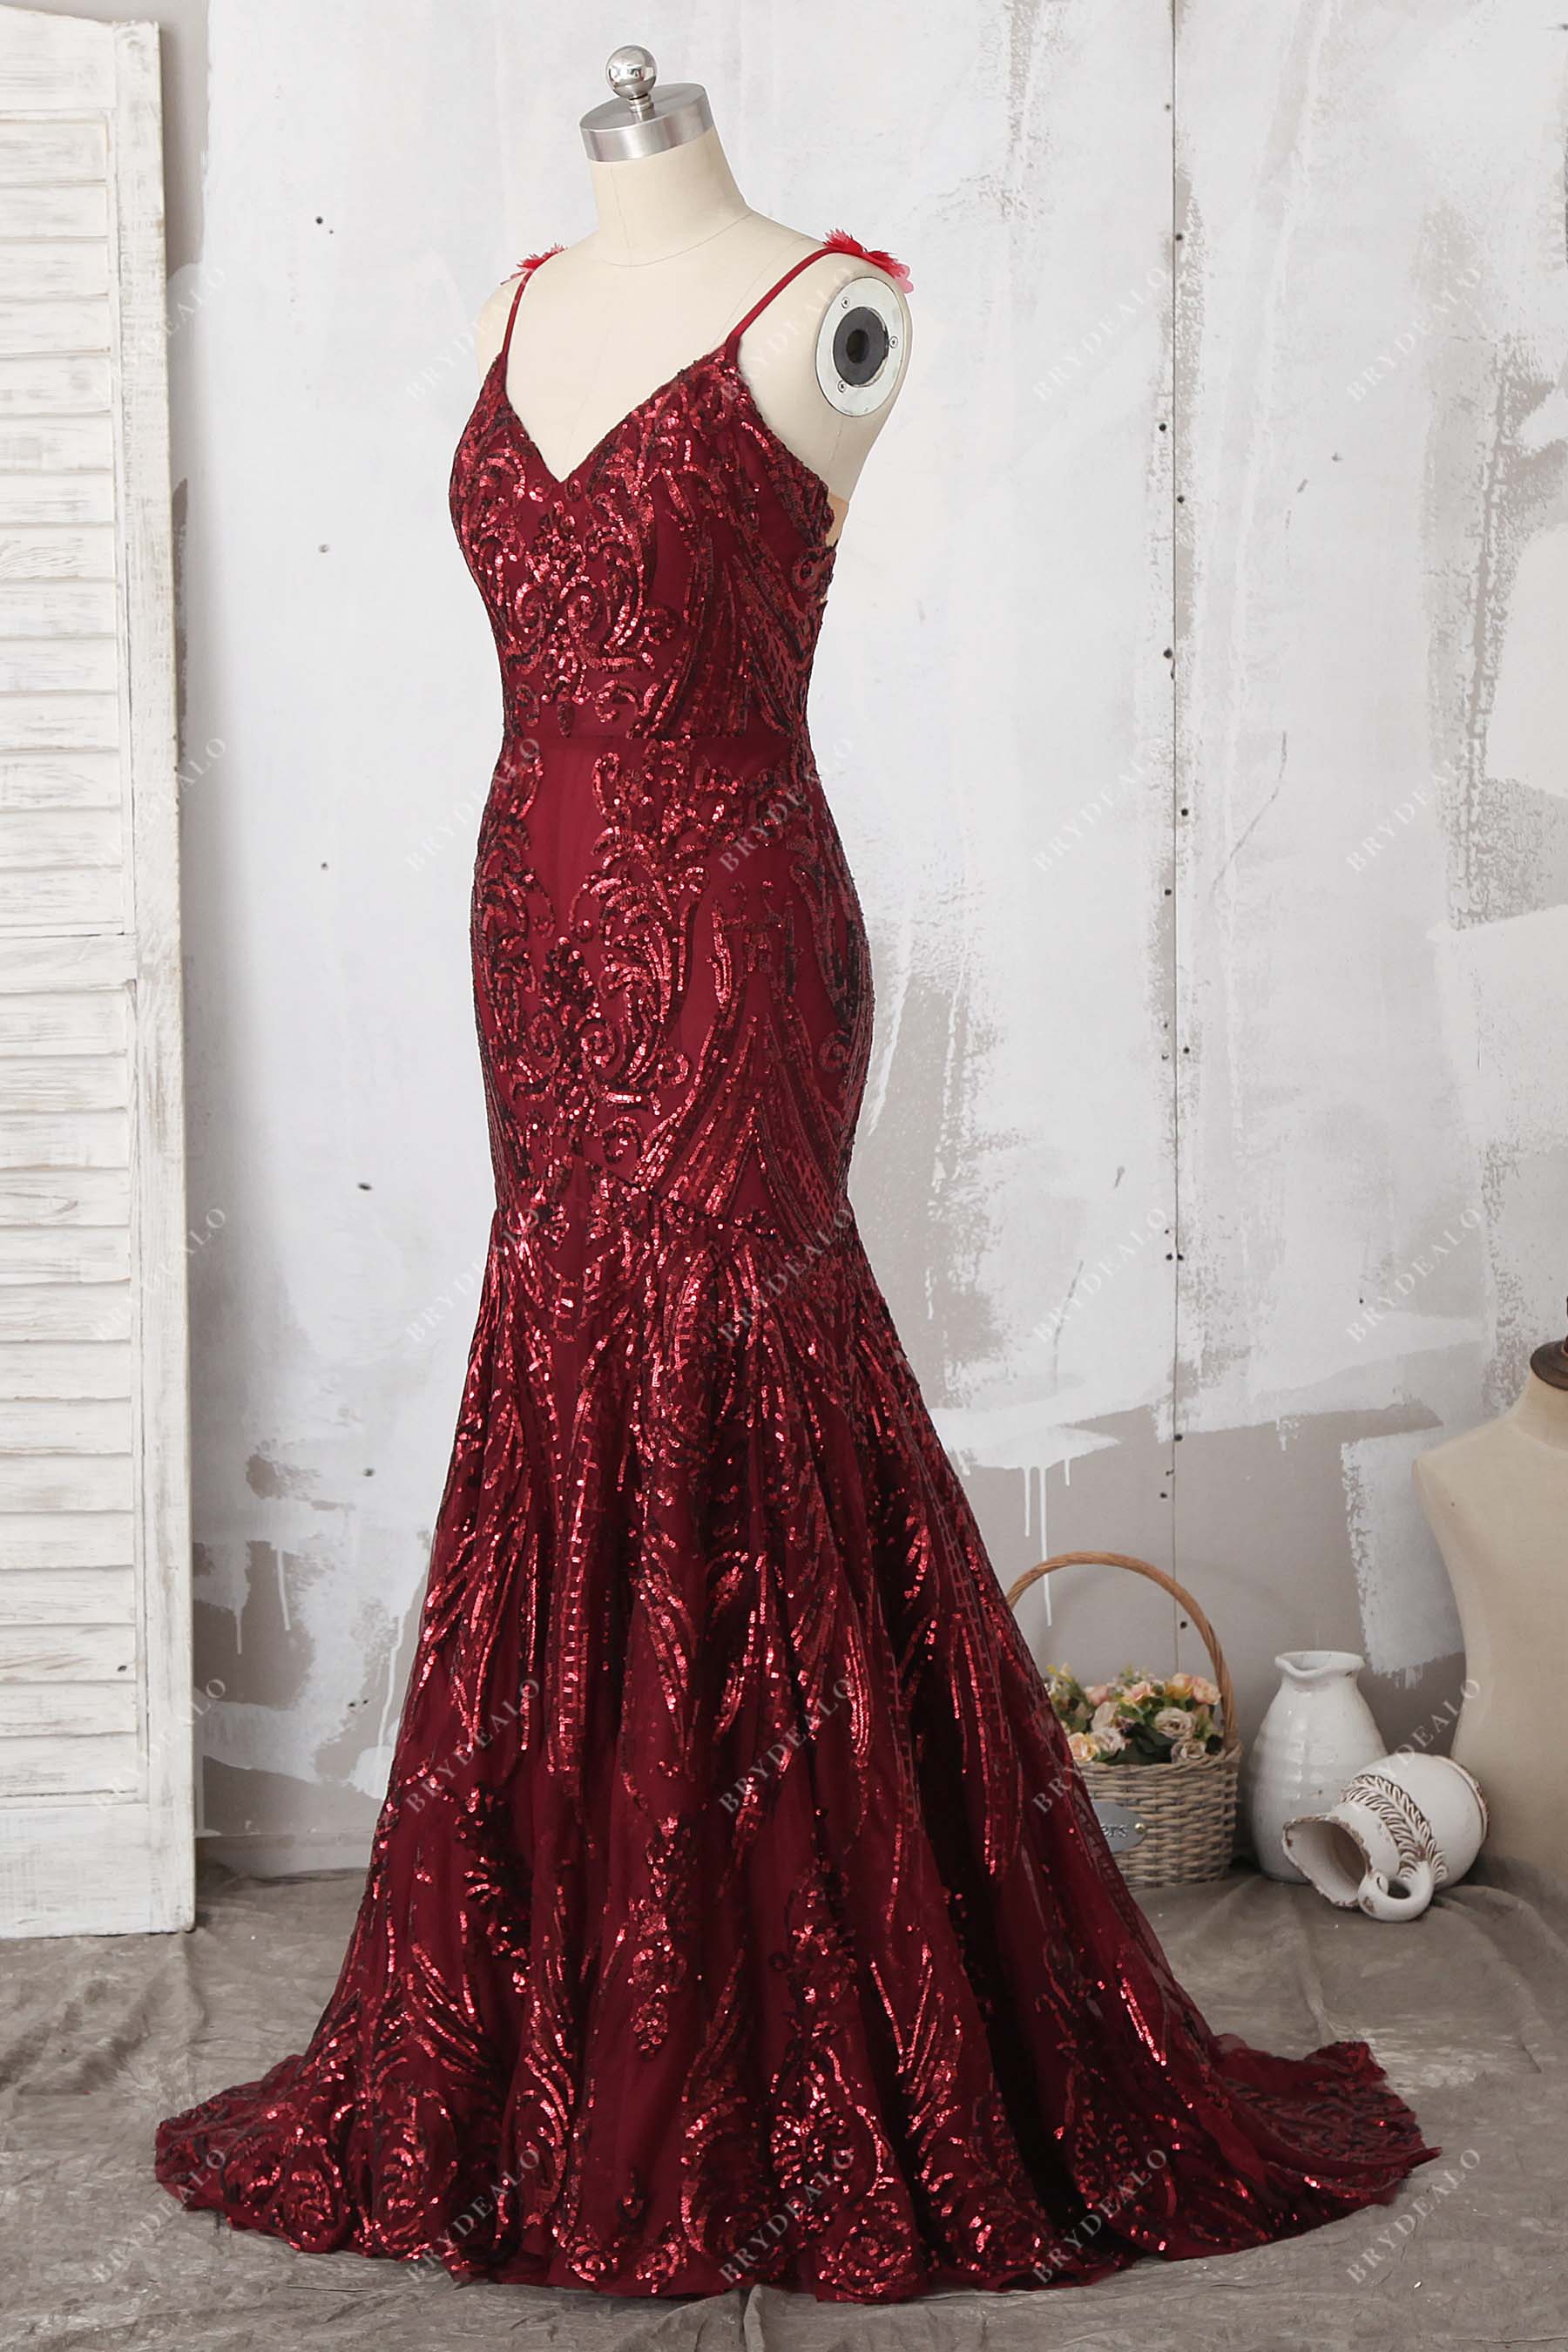 V-neck thin straps mermaid sequin gown